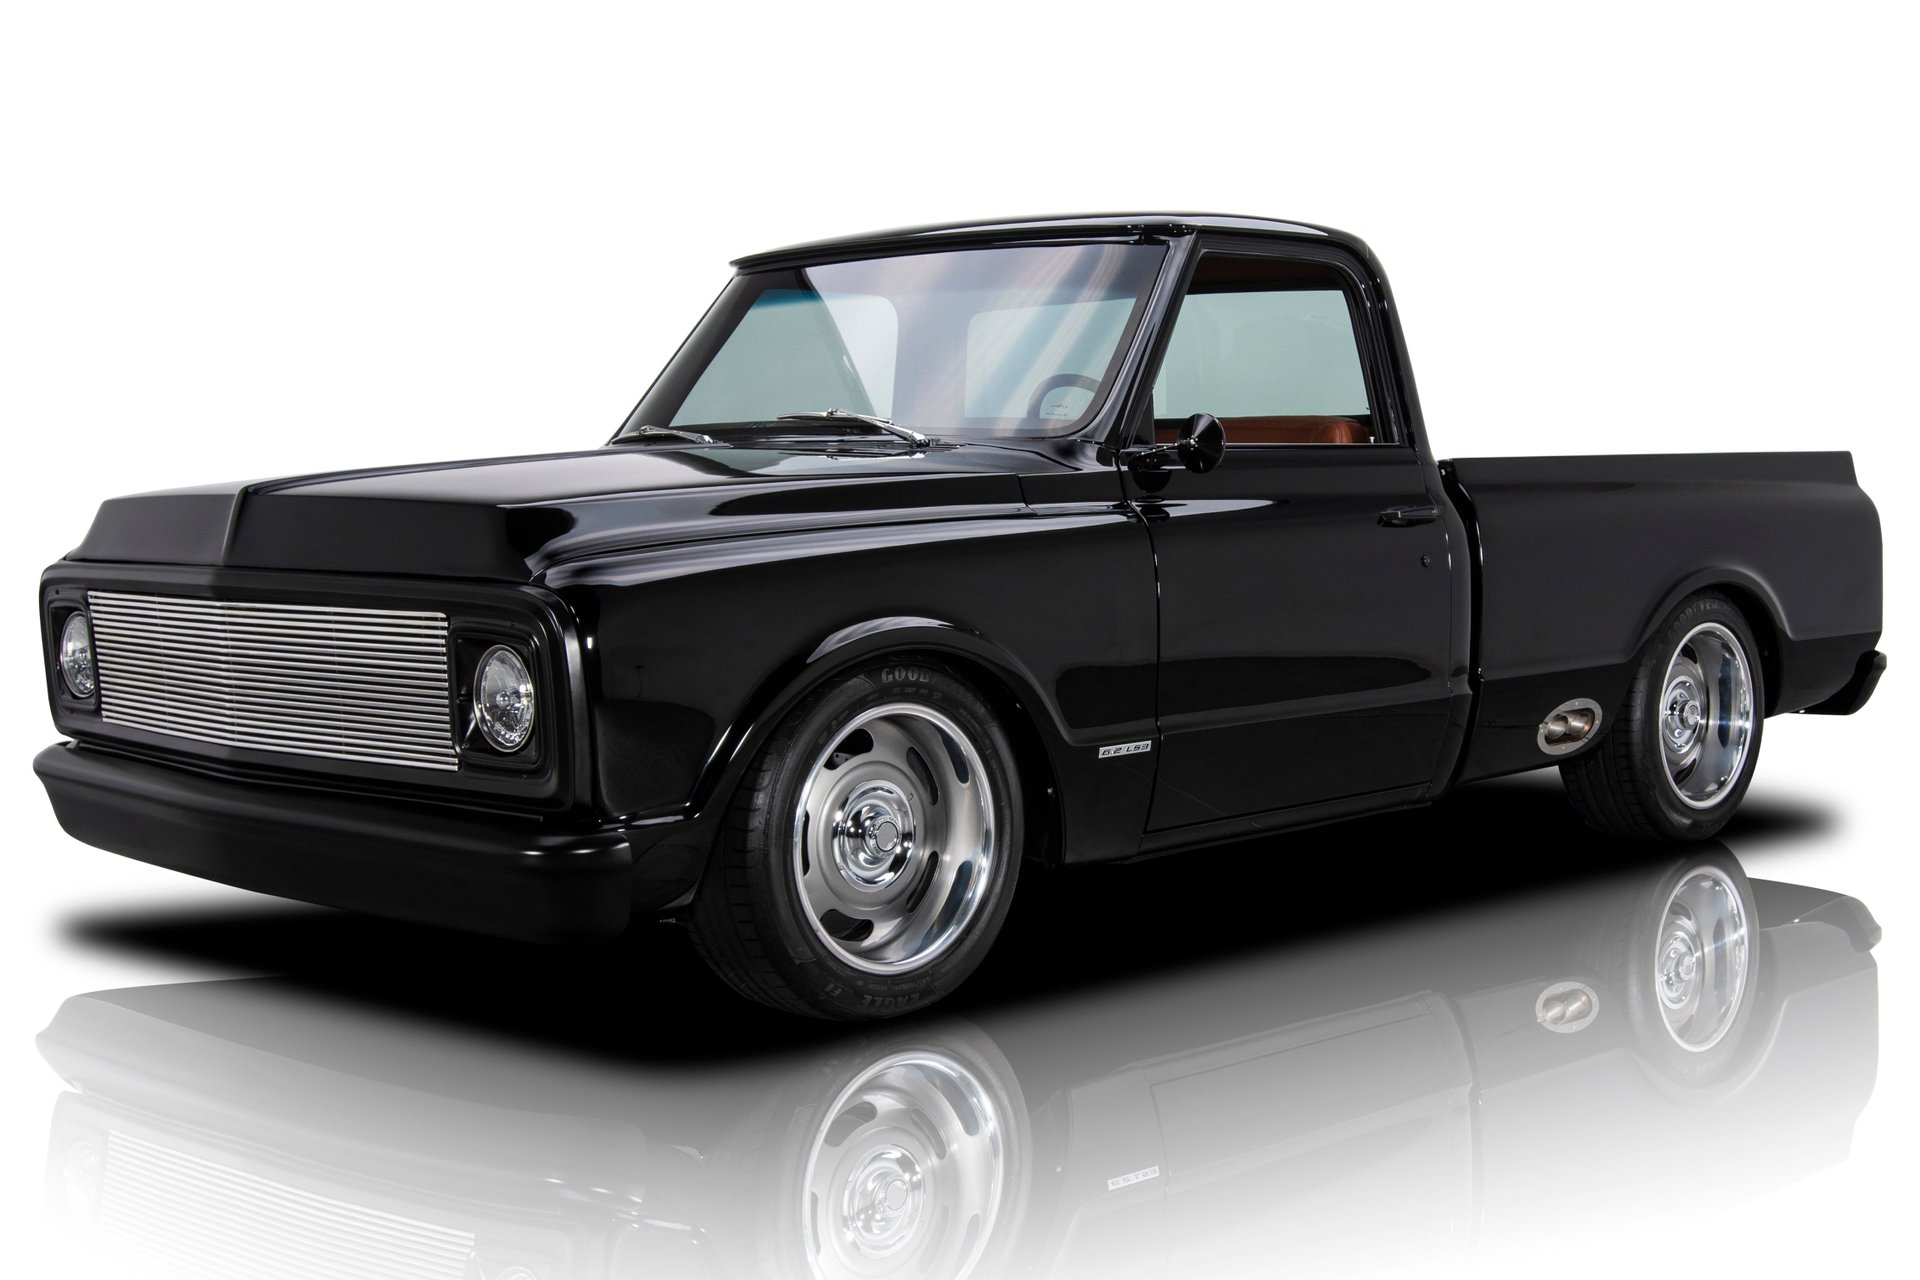 1970 Chevrolet C10 Rk Motors Classic Cars And Muscle Cars For Sale